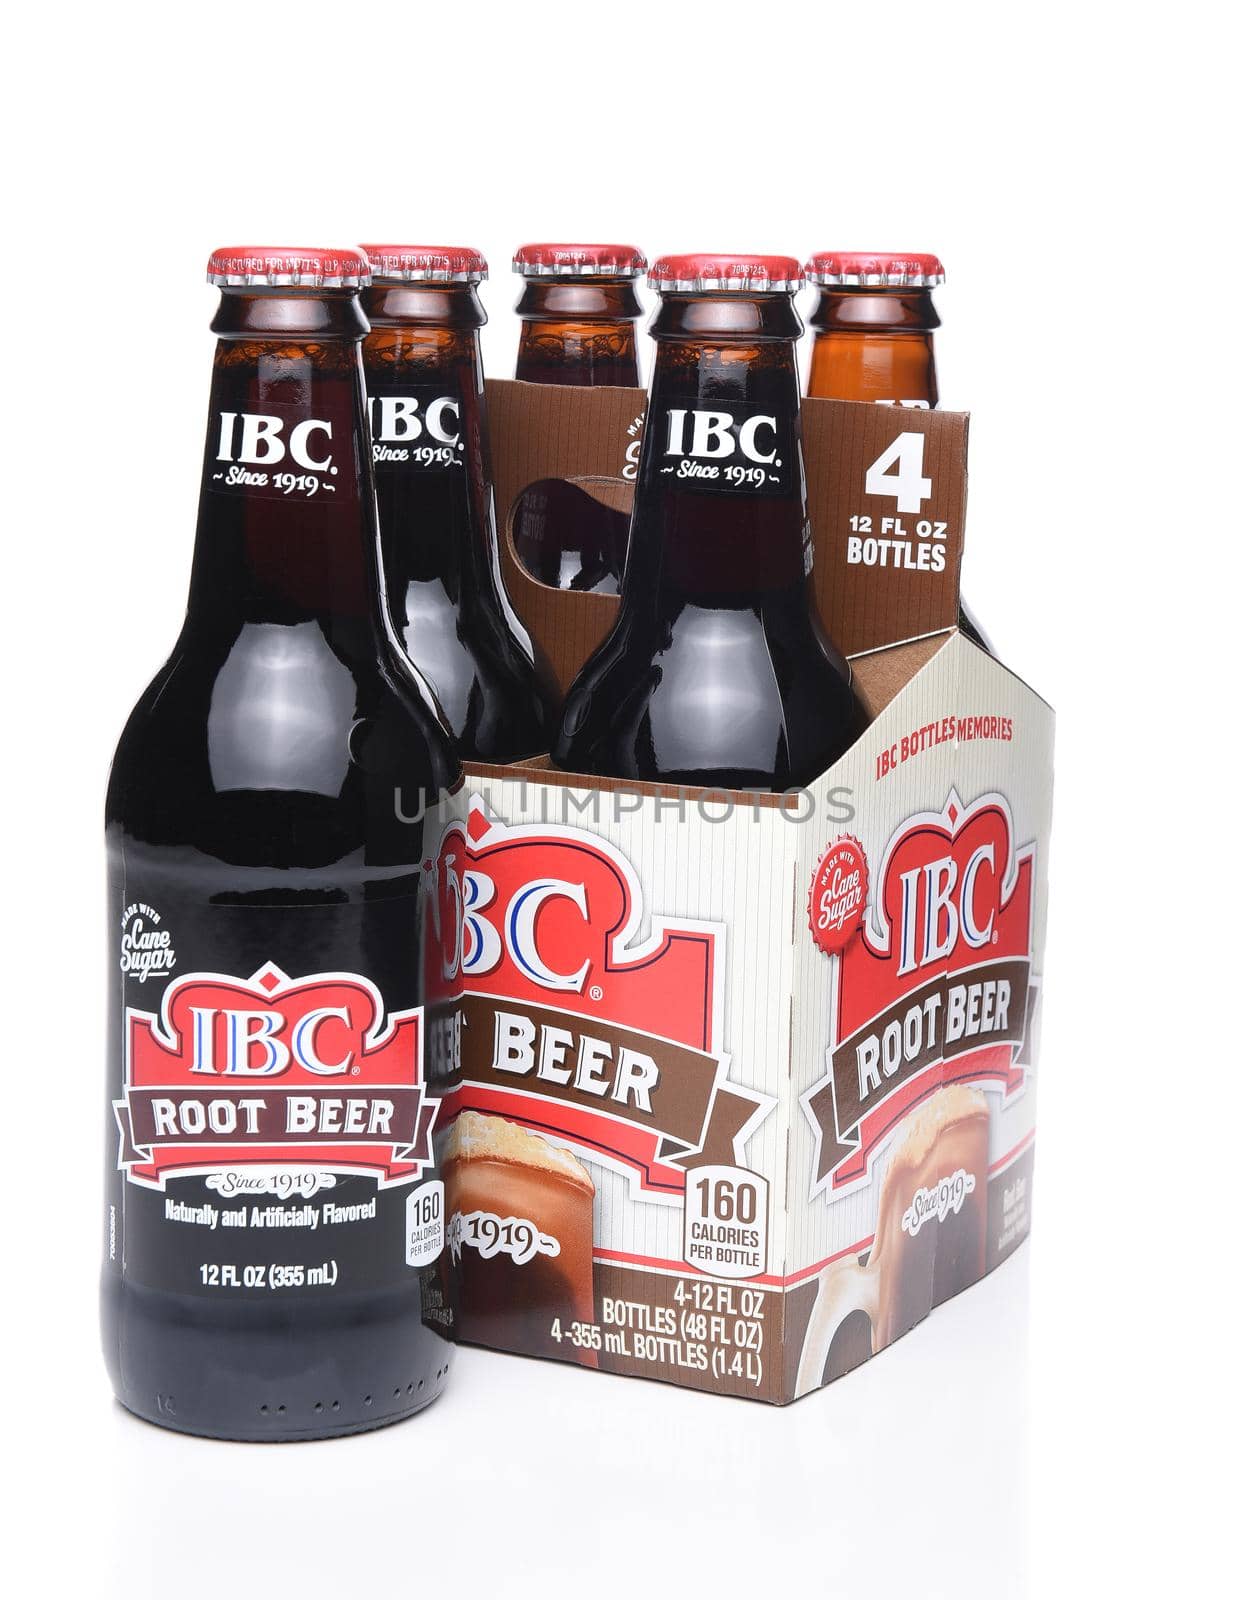 IBC Root Beer 4 Pack by sCukrov